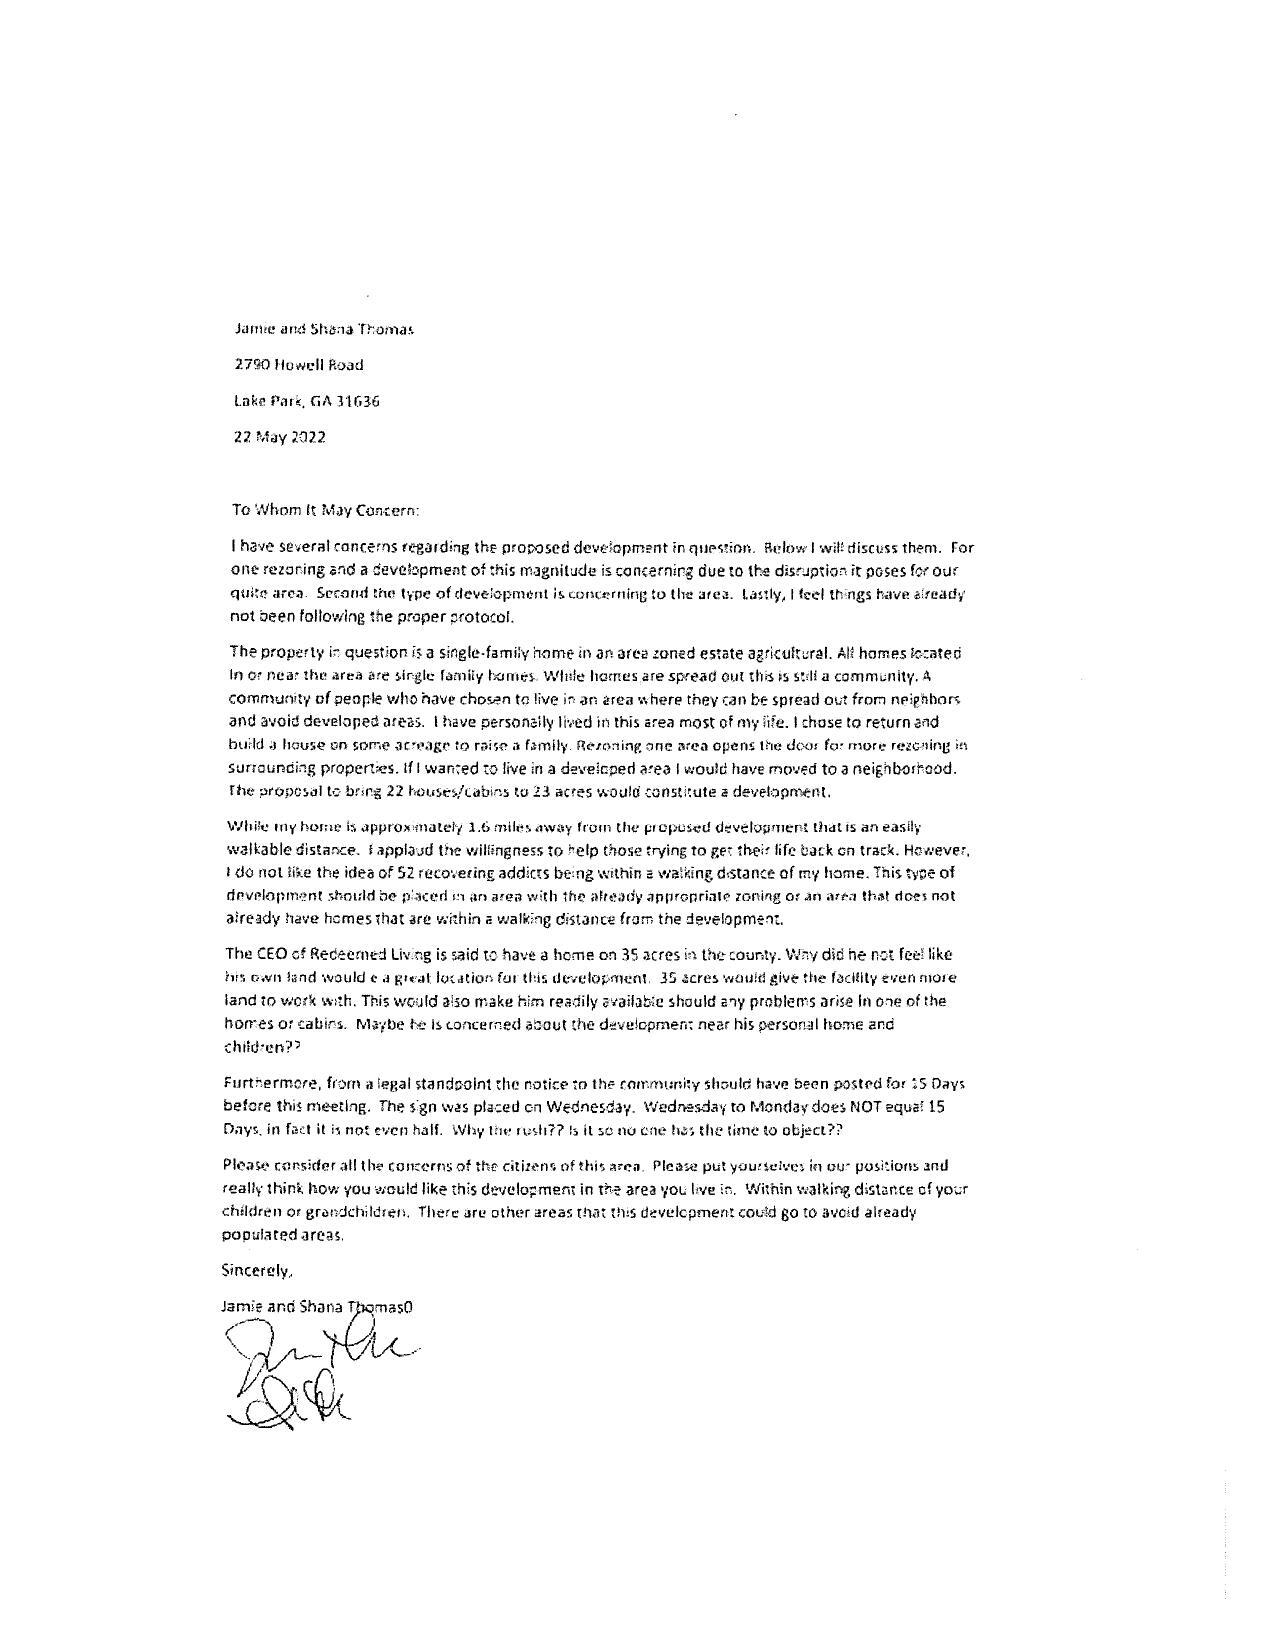 Opposition letter, Jamie and Shana Thomas